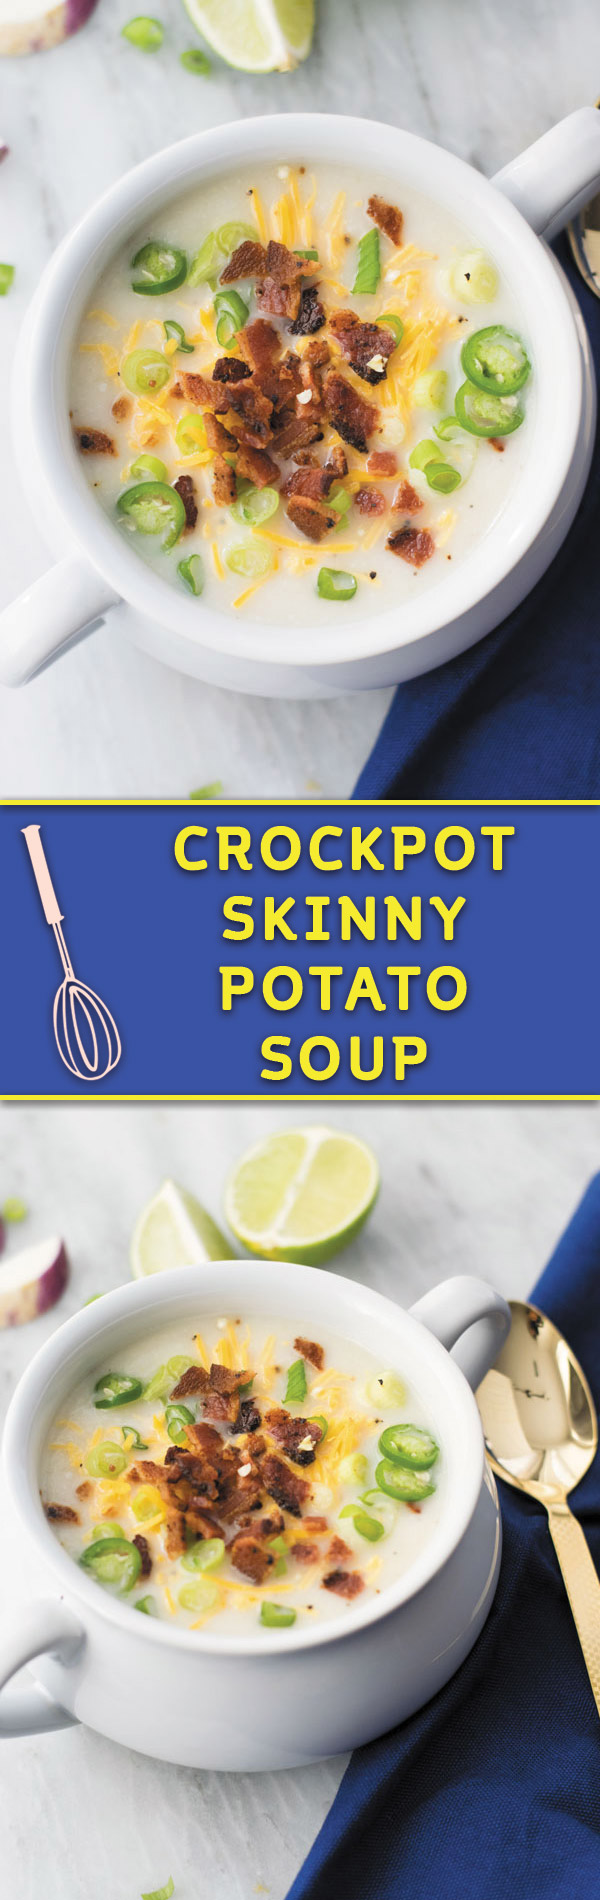 Crockpot skinny potato soup - Comforting CROCKPOT soup, lightened version of POTATO SOUP, mixed with cauliflower which even picky eater's can't tell! Perfect for an easy quick meal!